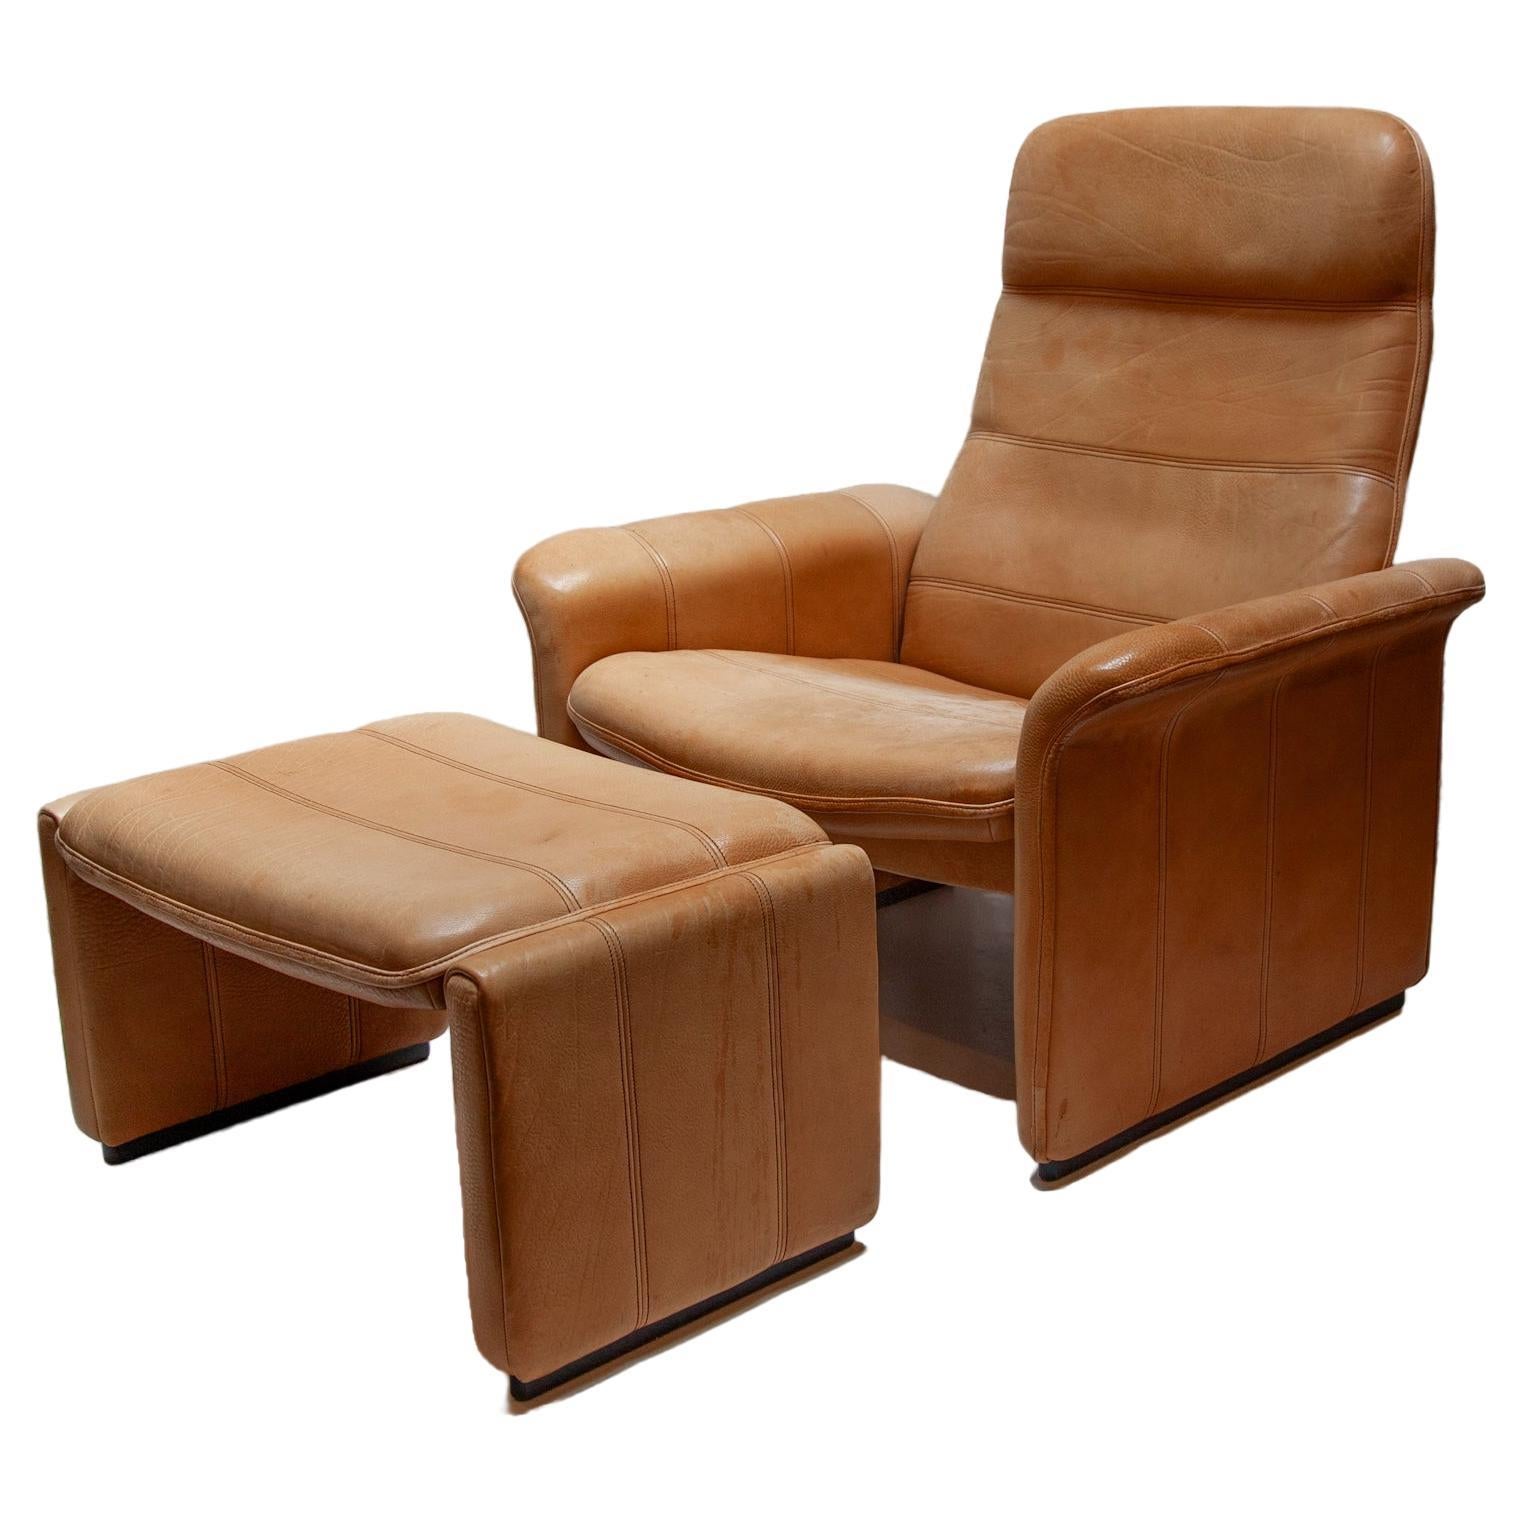 DS-50 Camel Buffalo Neck Leather Lounge Chair & Footstool by De Sede, 1970s For Sale